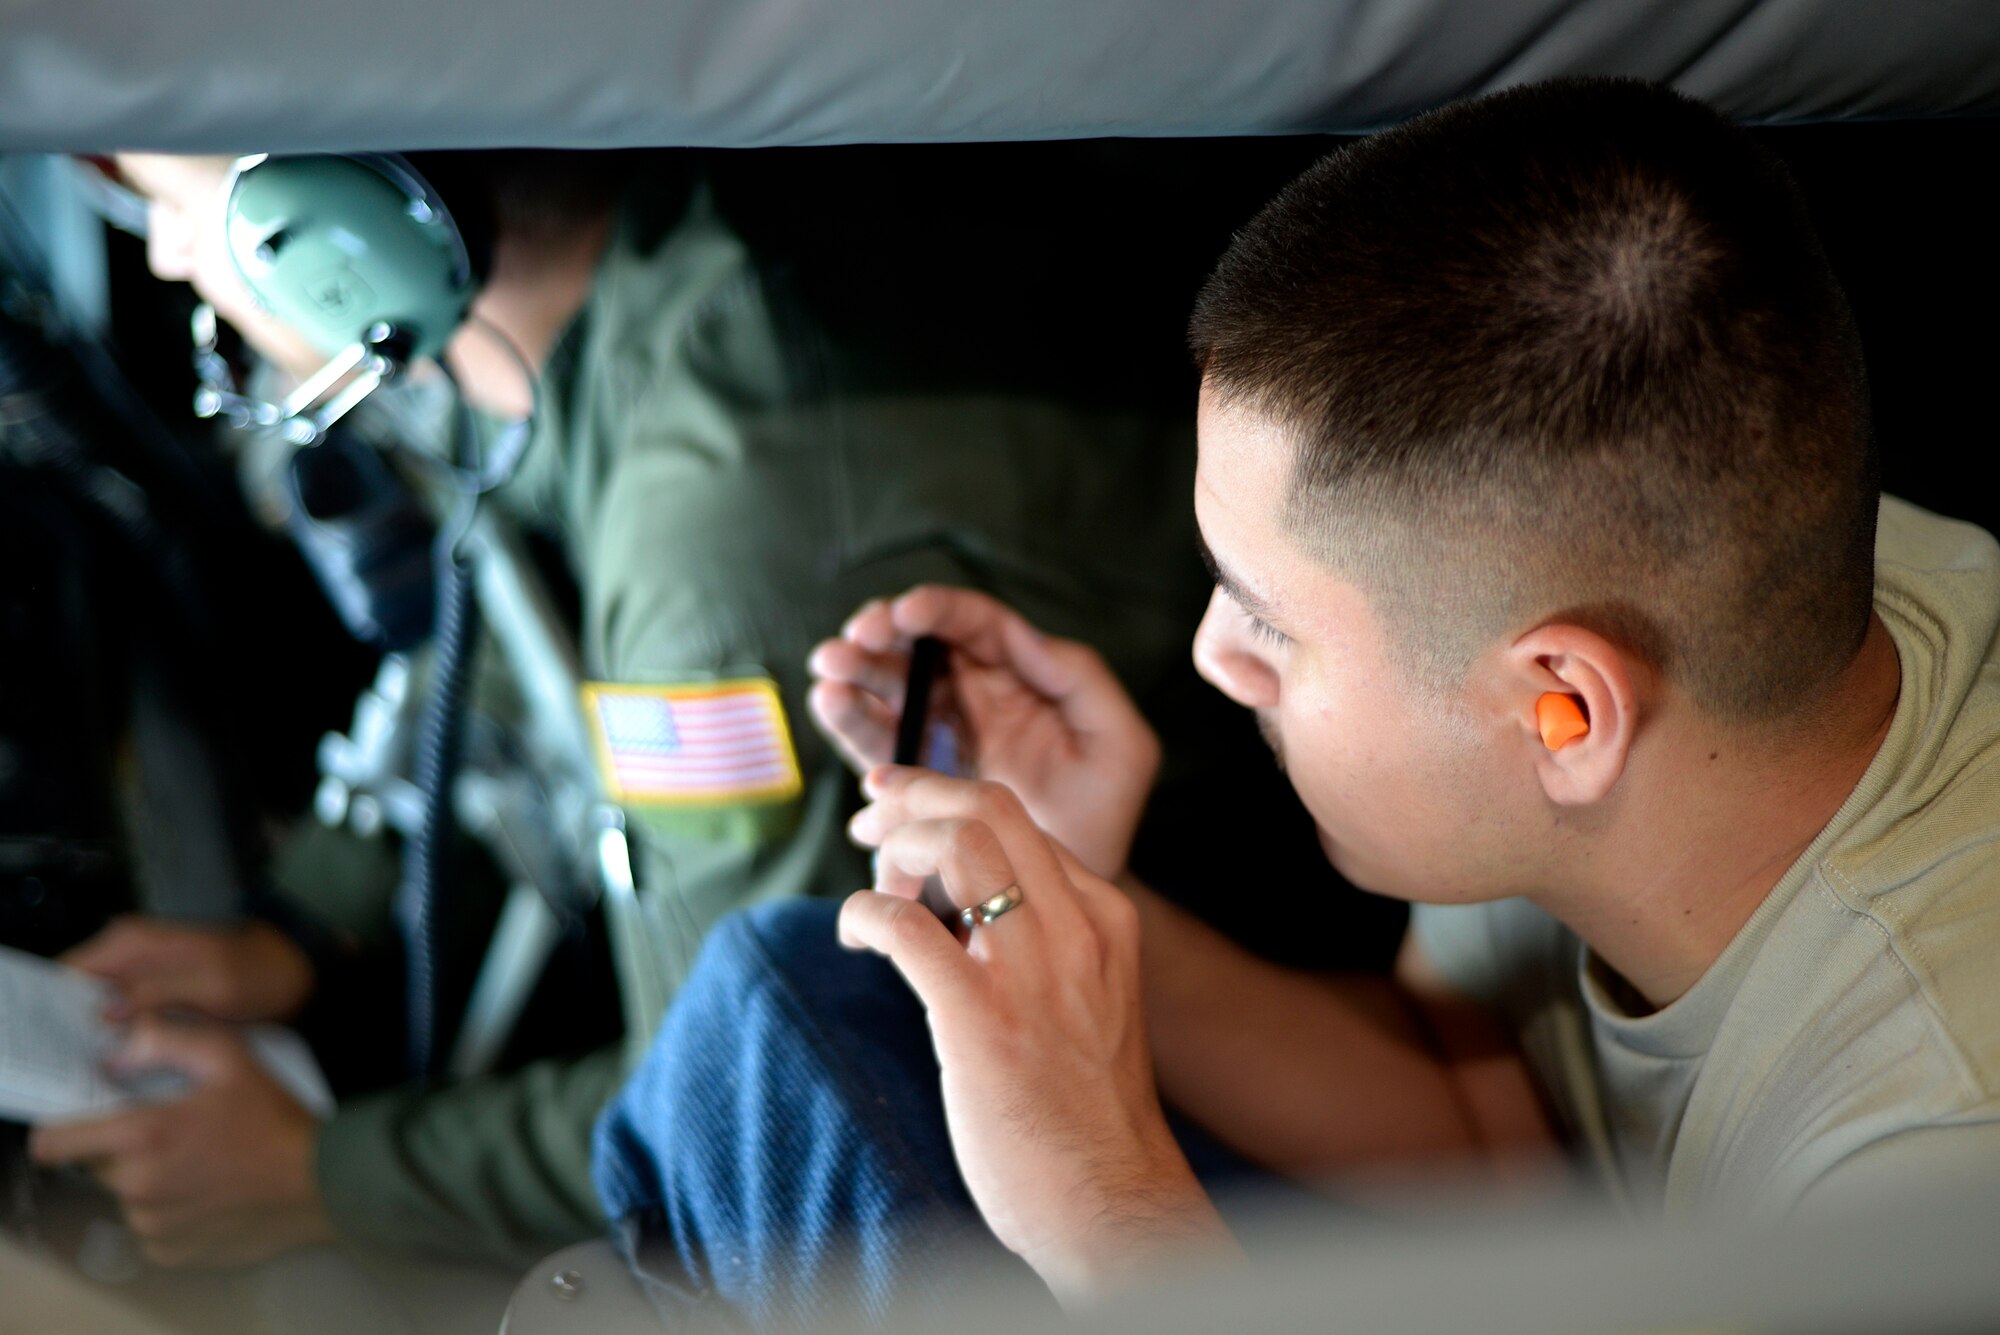 Airman 1st Class Ysaak Hemenway, a new Airman assigned to the 6th Operations Support Squadron takes a picture as the boom operator refuels an F-22 Raptor July 18, 2016. Boom operators provide a very important tactical advantage when aircraft need refueling midflight by allowing them to stay in the air and complete their mission. (U.S. Air Force photo by Airman 1st class Rito Smith)